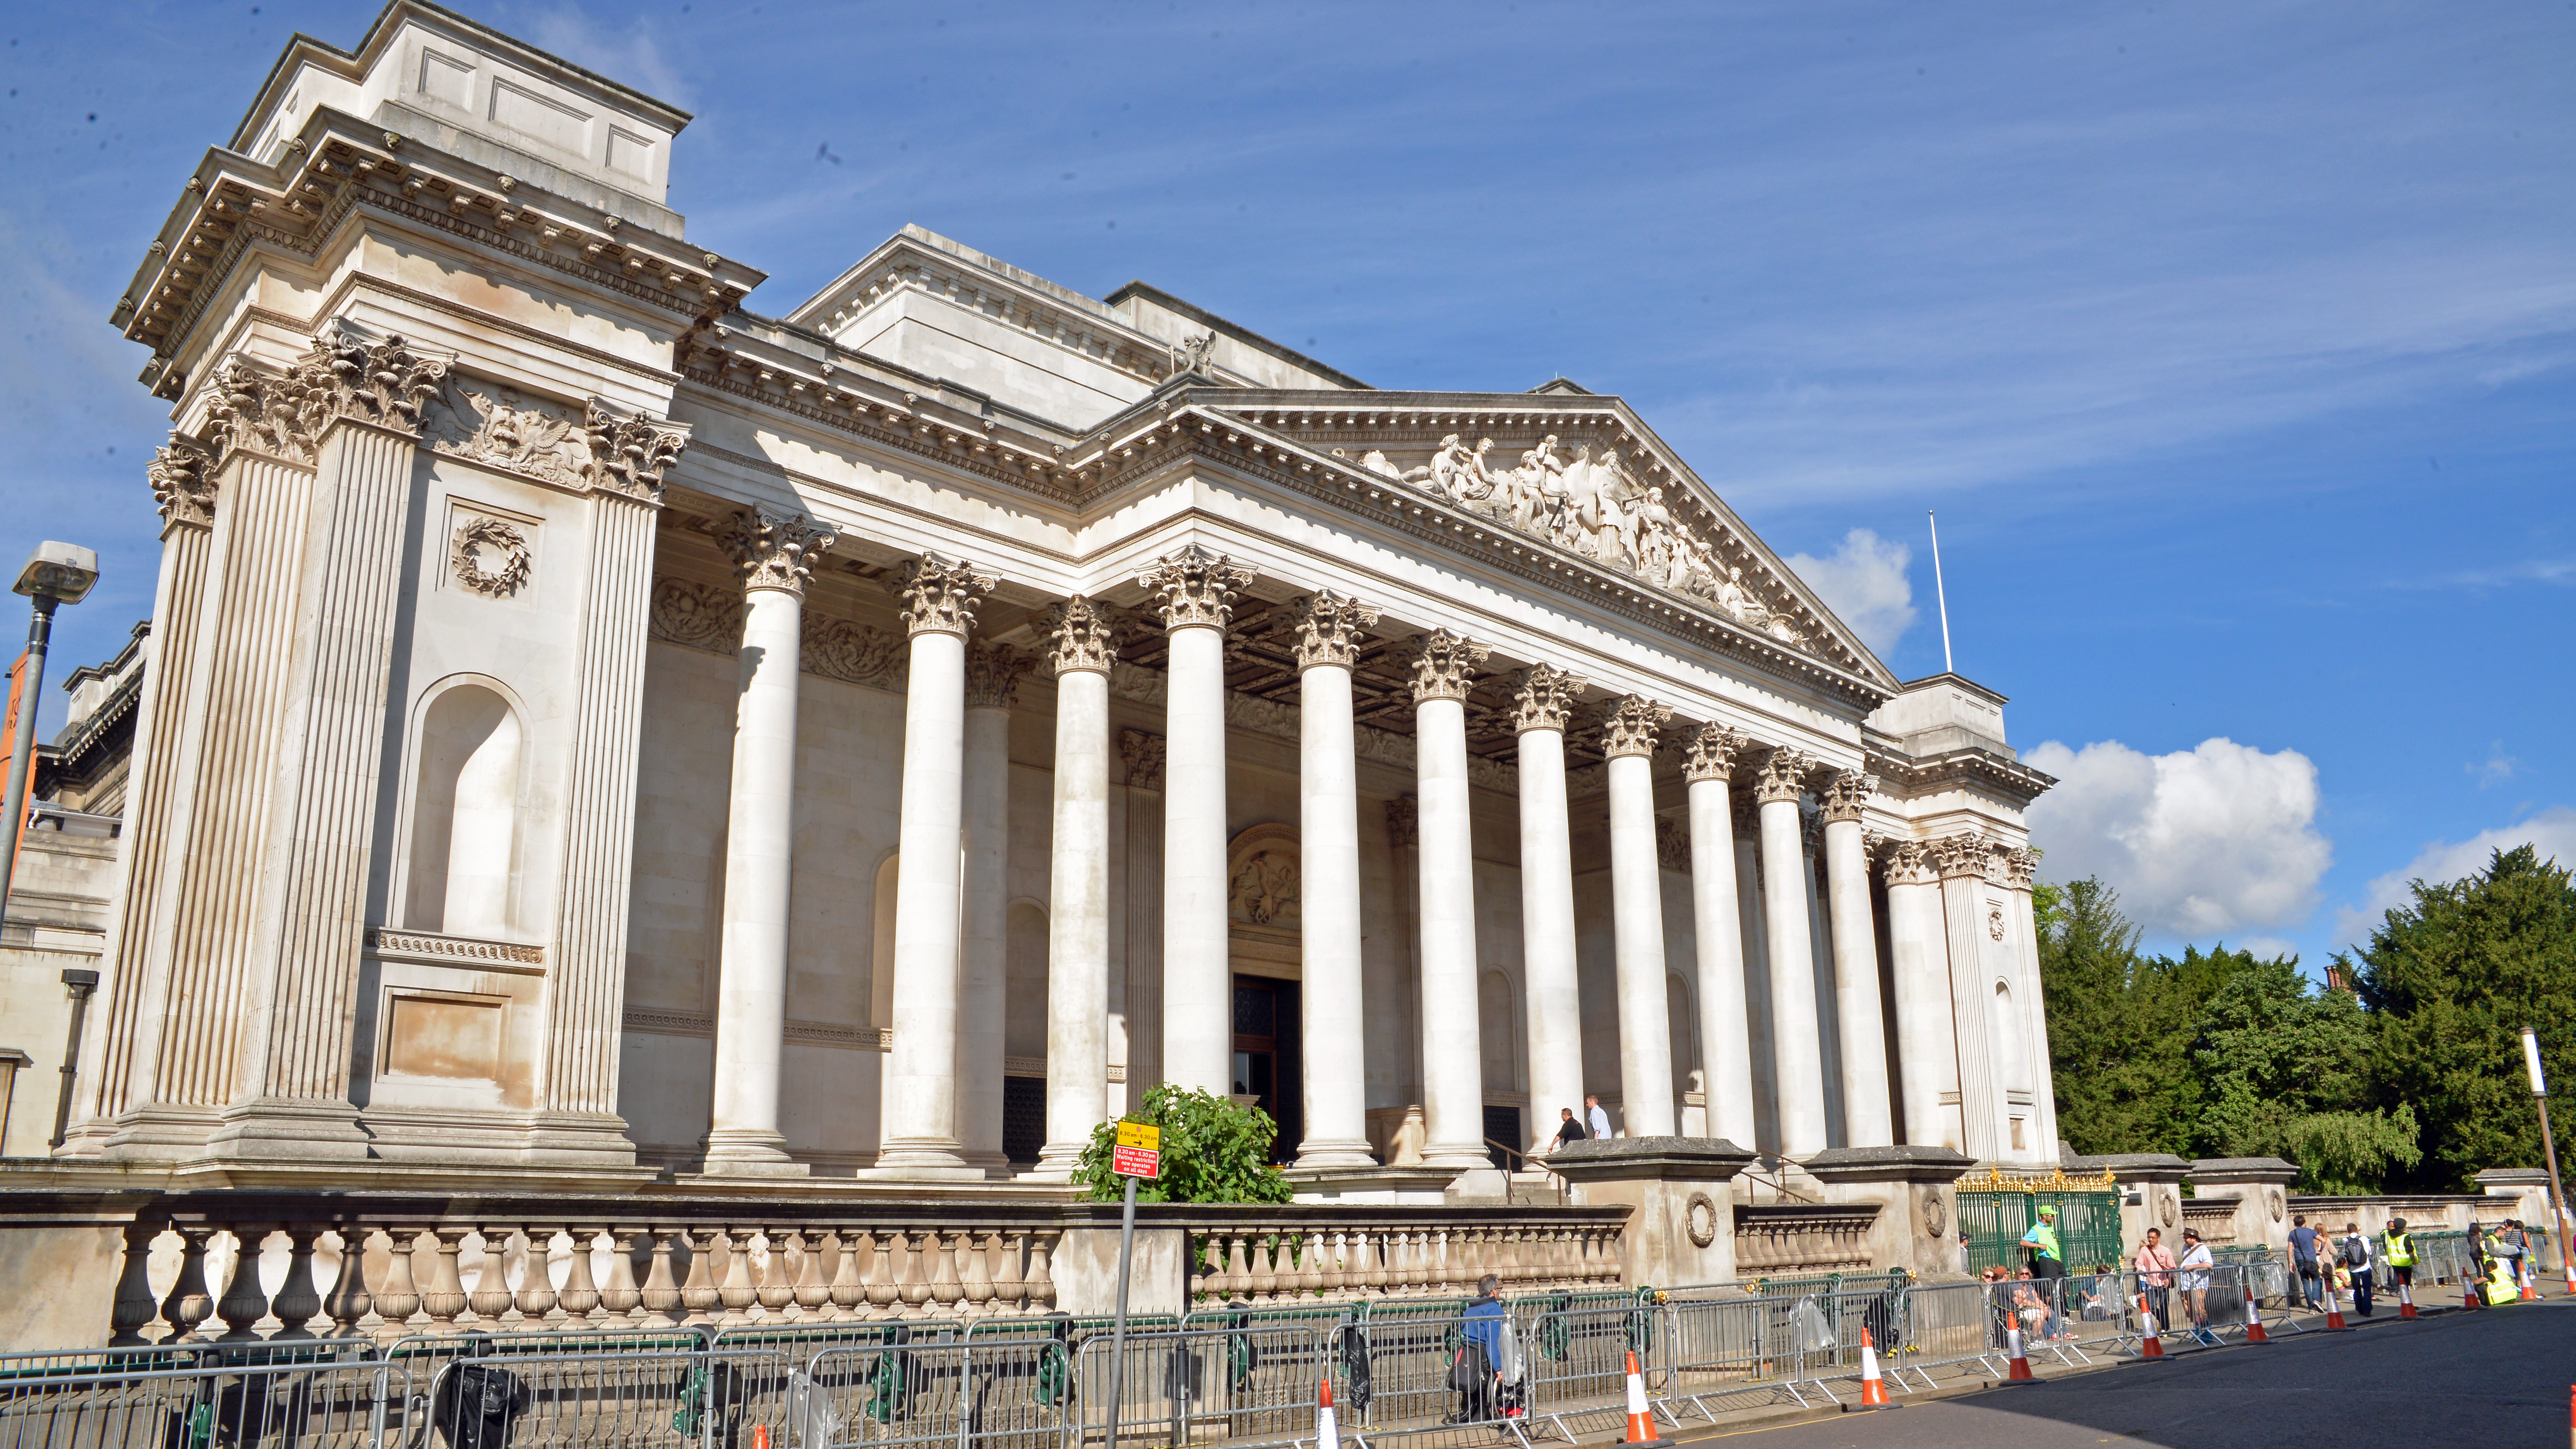 The Fitzwilliam Museum in Cambridge, UK was one of the museums targetted for attack